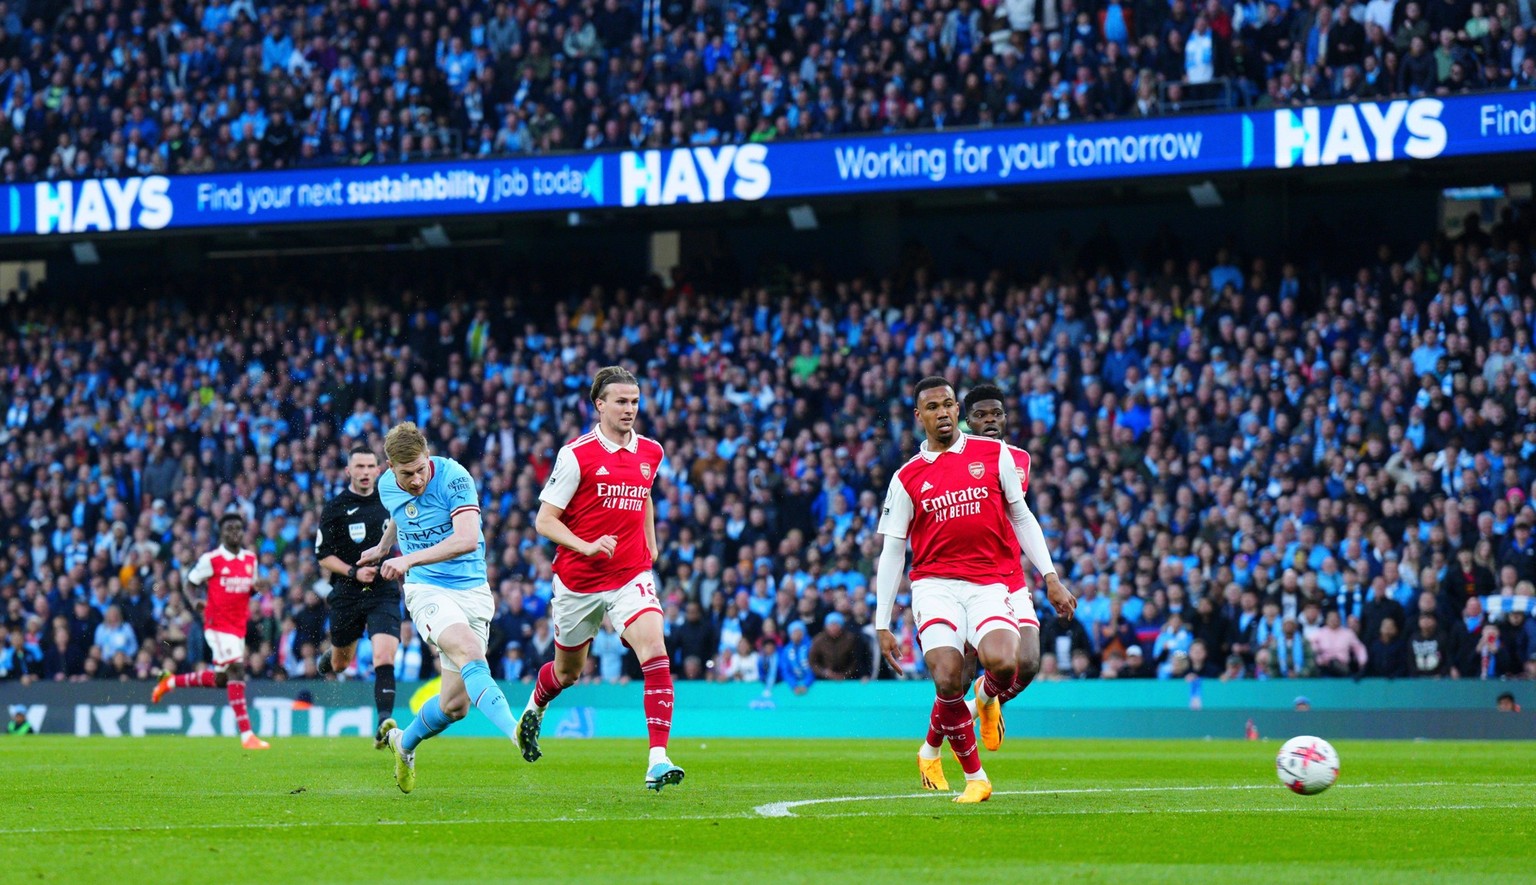 Mandatory Credit: Photo by Javier Garcia/Shutterstock 13884894ck Kevin De Bruyne of Manchester City scores the opening goal Manchester City v Arsenal, Premier League, Football, Etihad Stadium, Manches ...